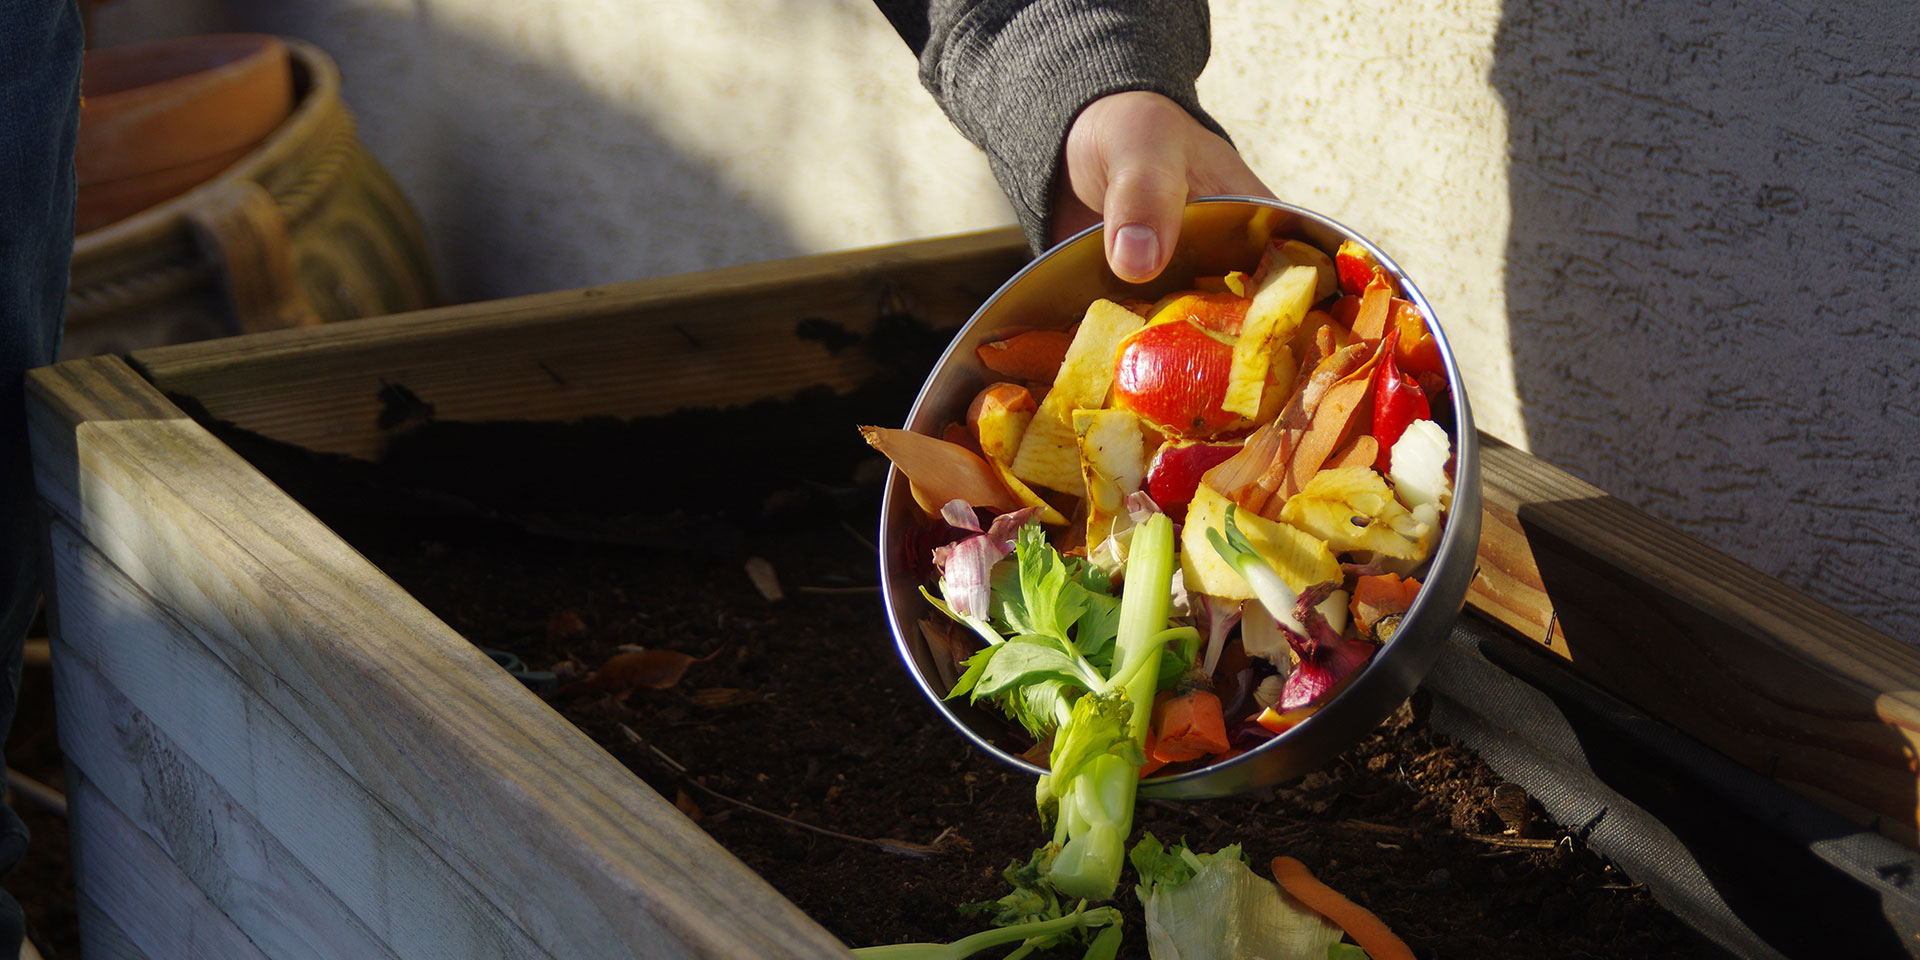 How Long Does It Take For Food To Compost